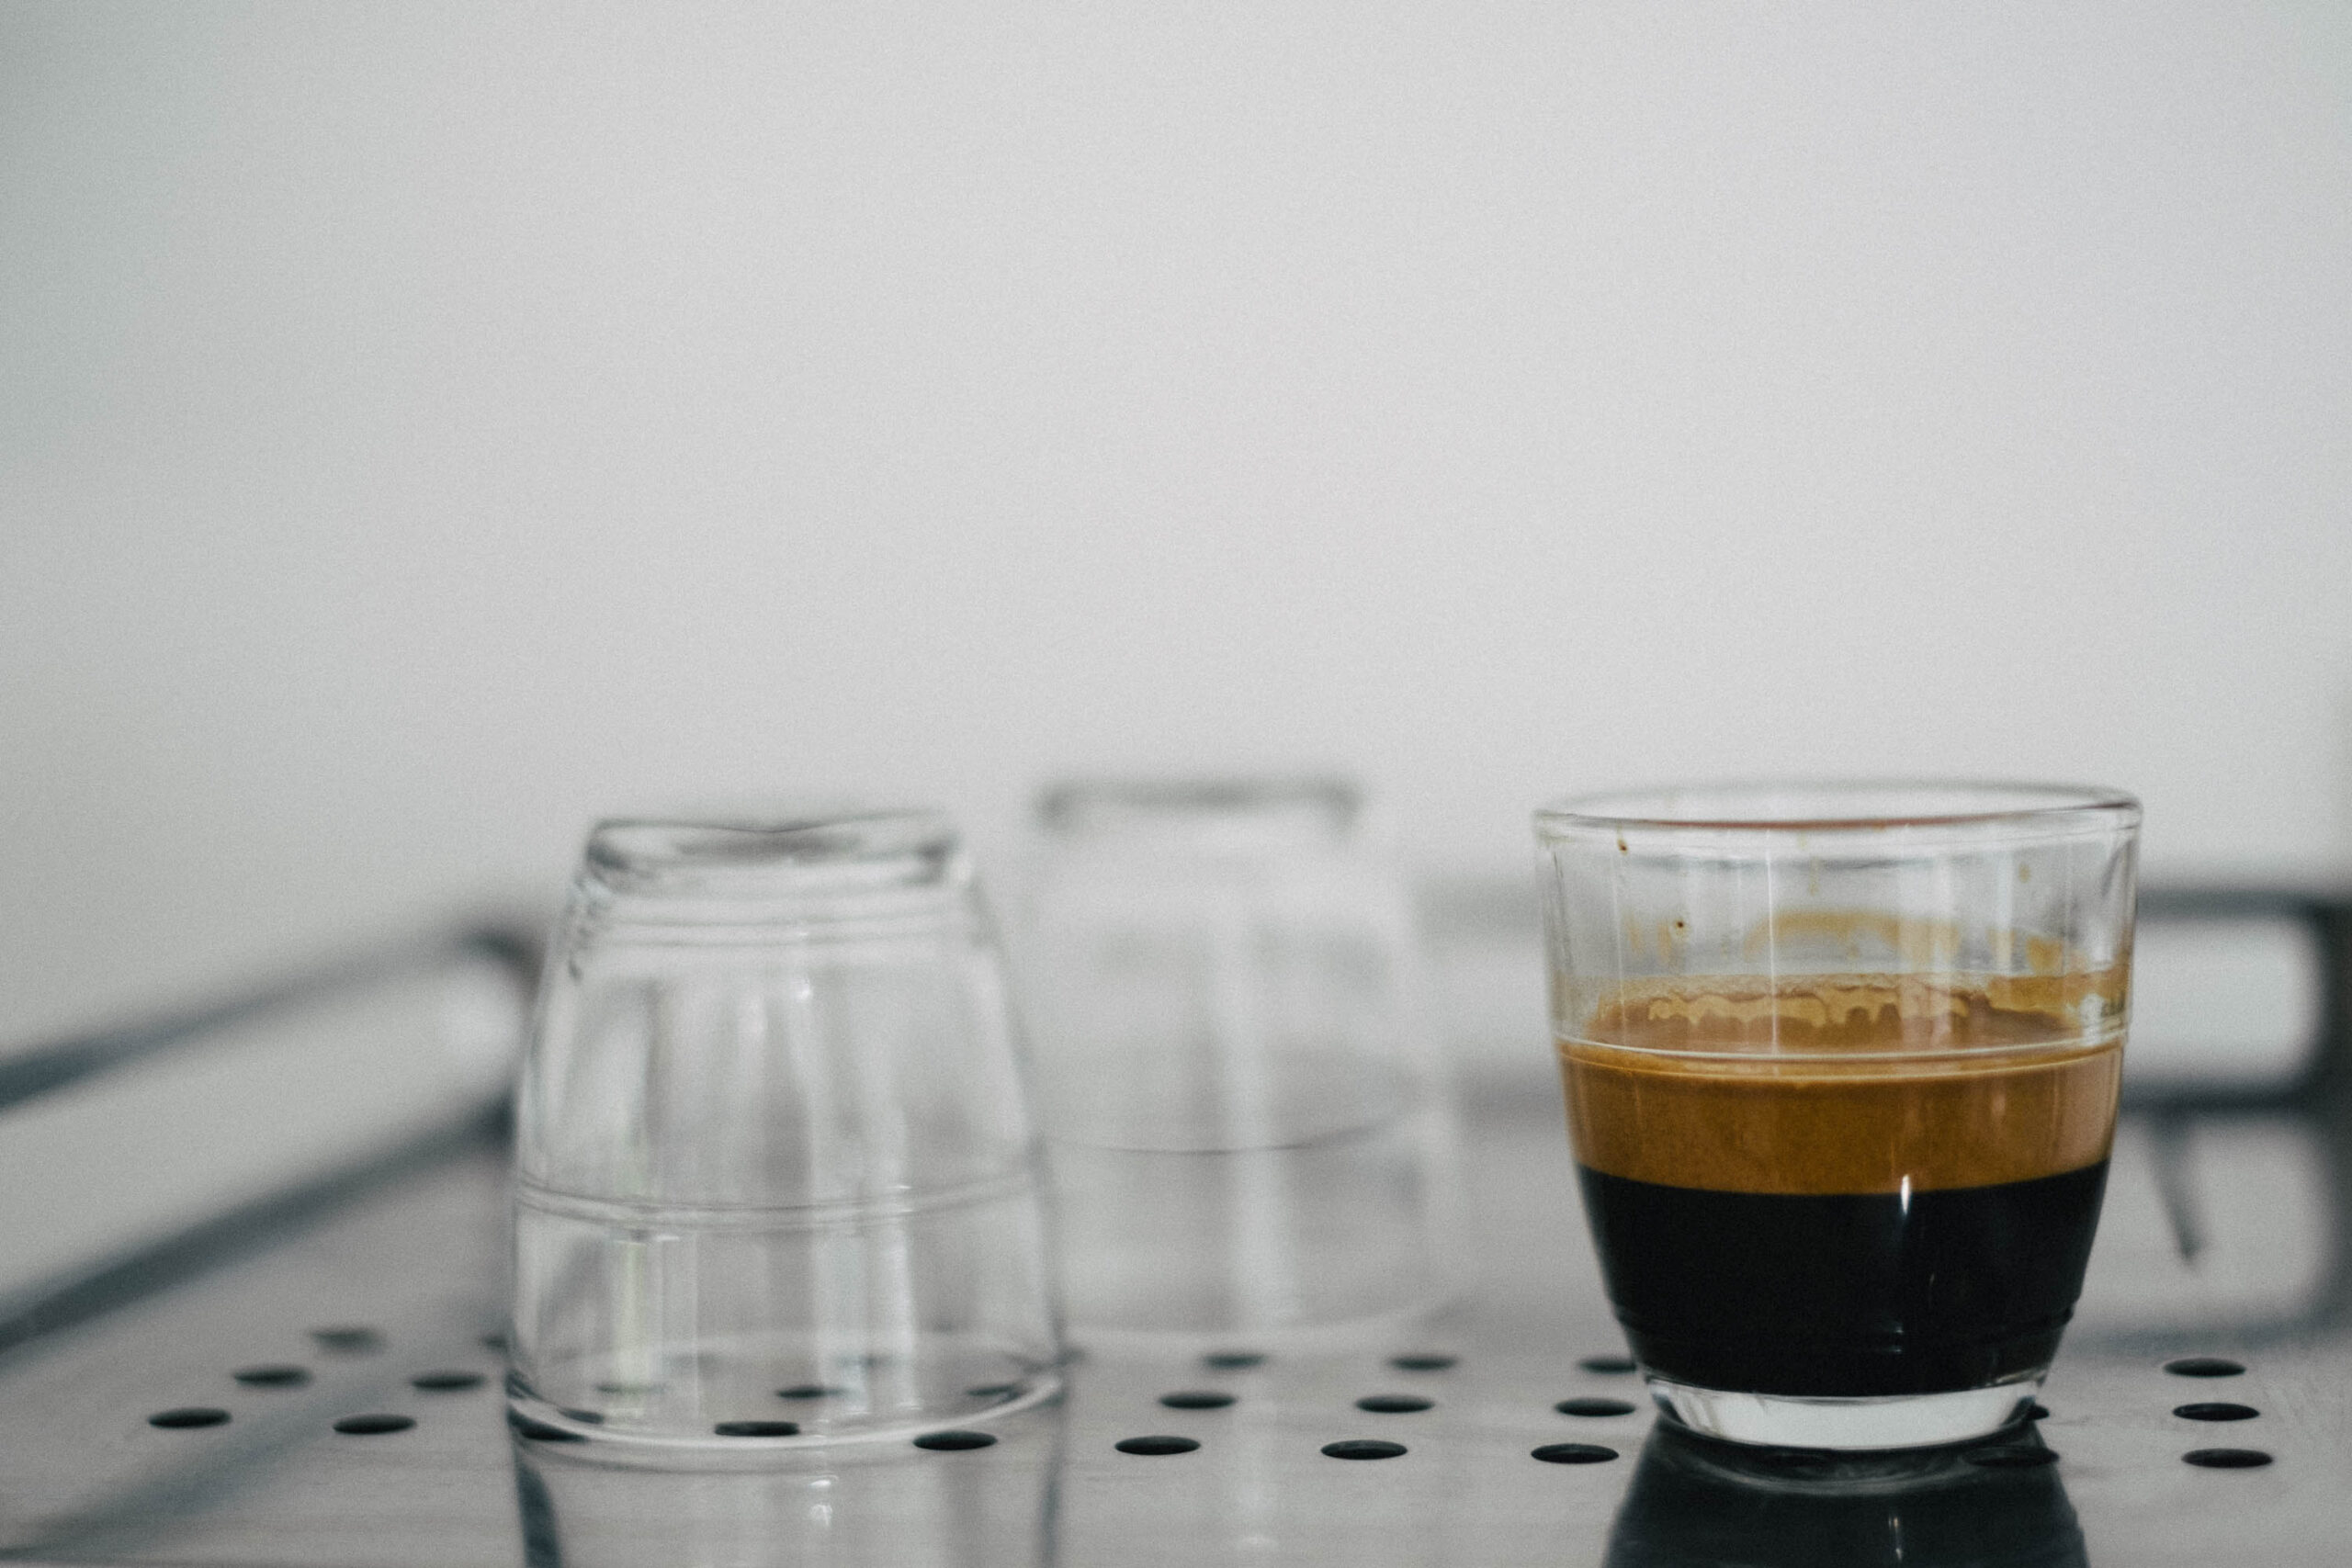 three small glass espresso cups, sitting on the metal top of a coffee machine (not pictured). two are empty, placed facing downwards, the third is 2/3 full of espresso coffee.